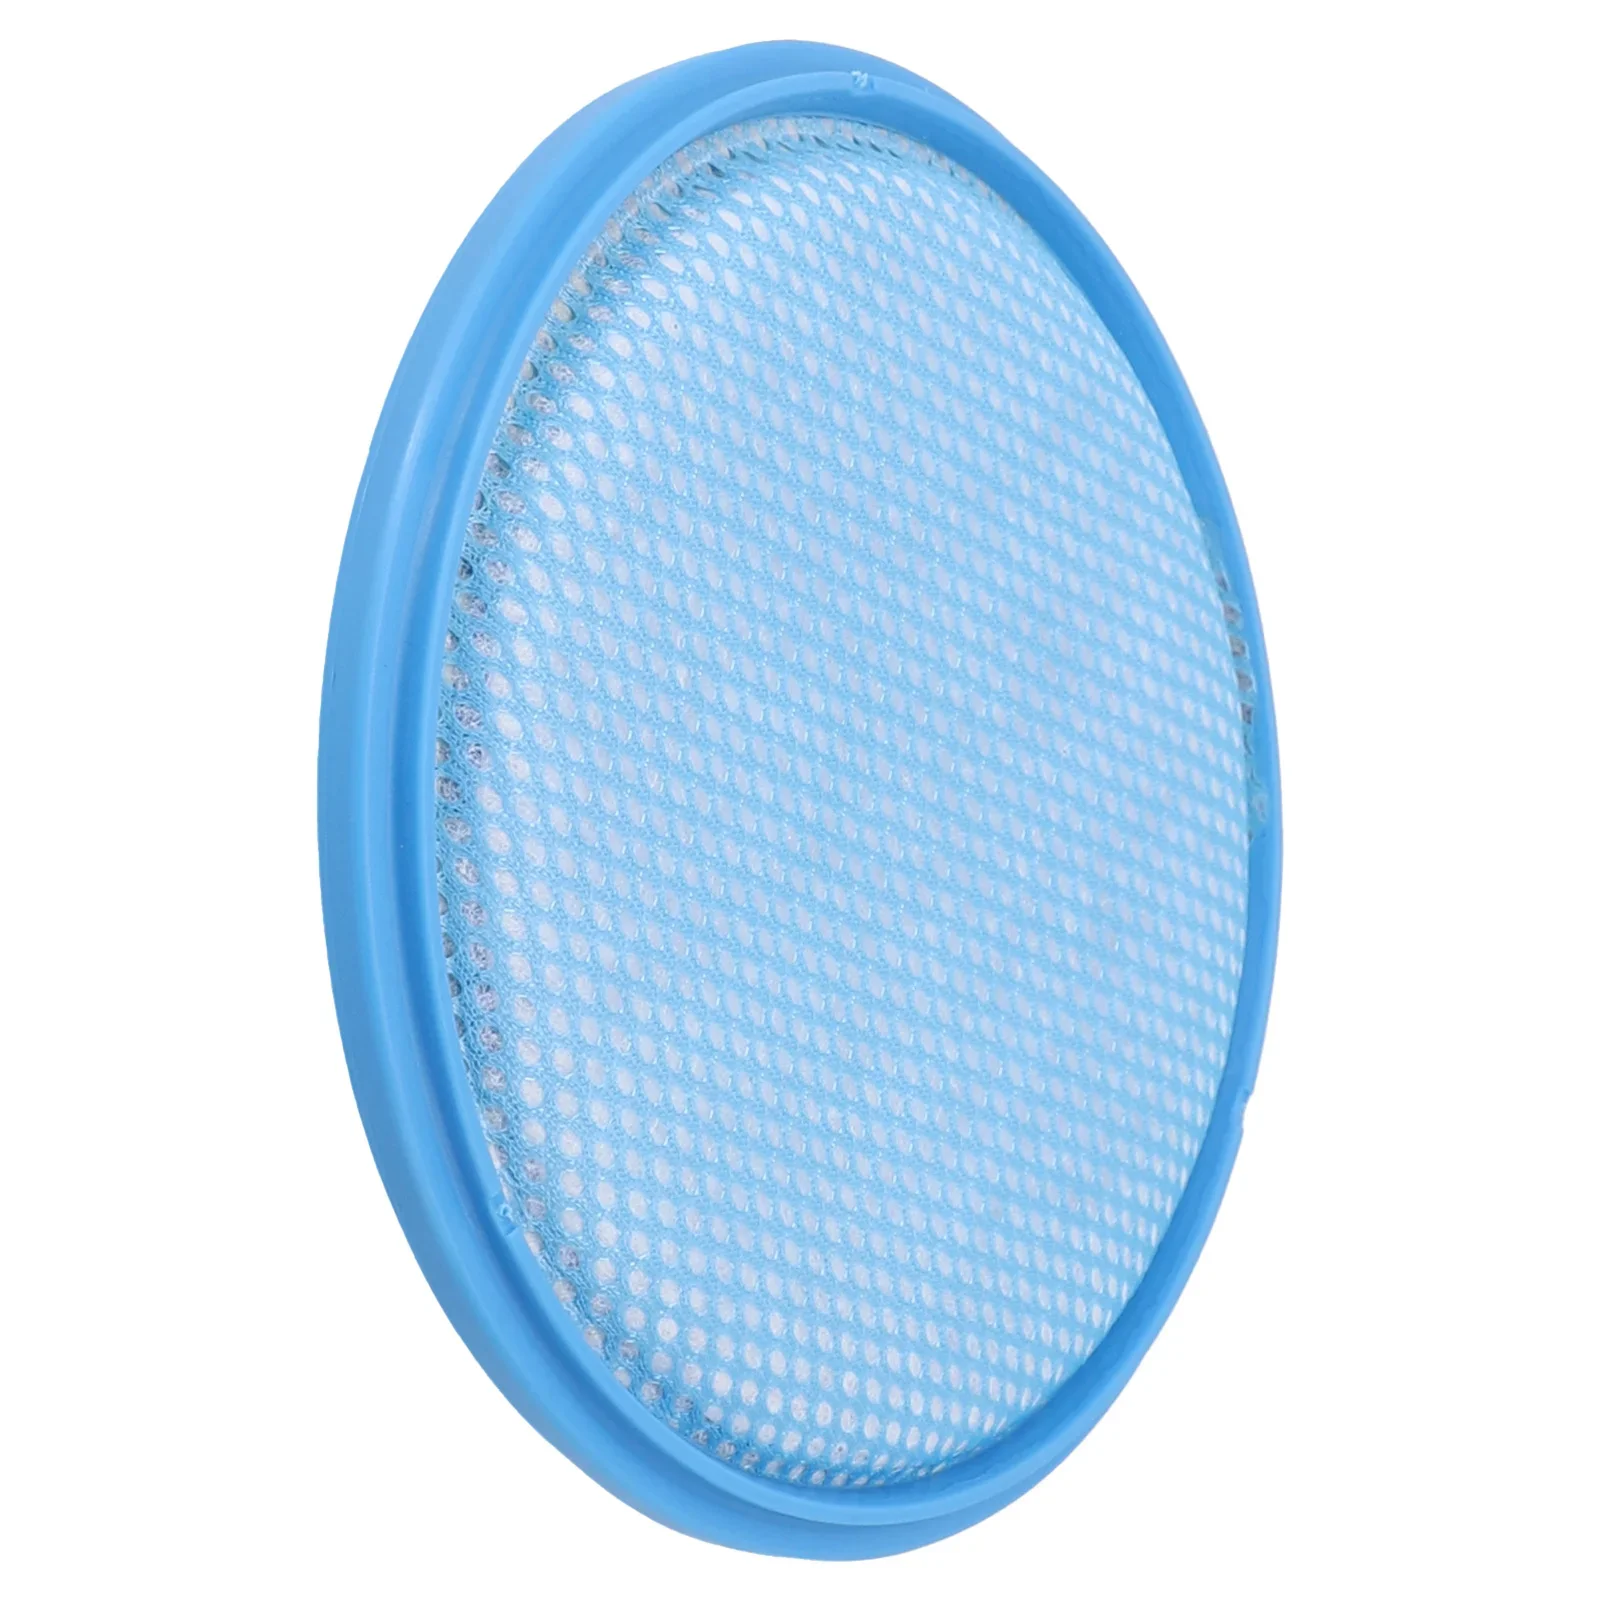 

Vacuum Cleaner Blue Round Filter 130mm For Samsung Cyclone Force SC05 SC07 SC15 VC07 Sweeper Robot Filter Spare Part Accessories